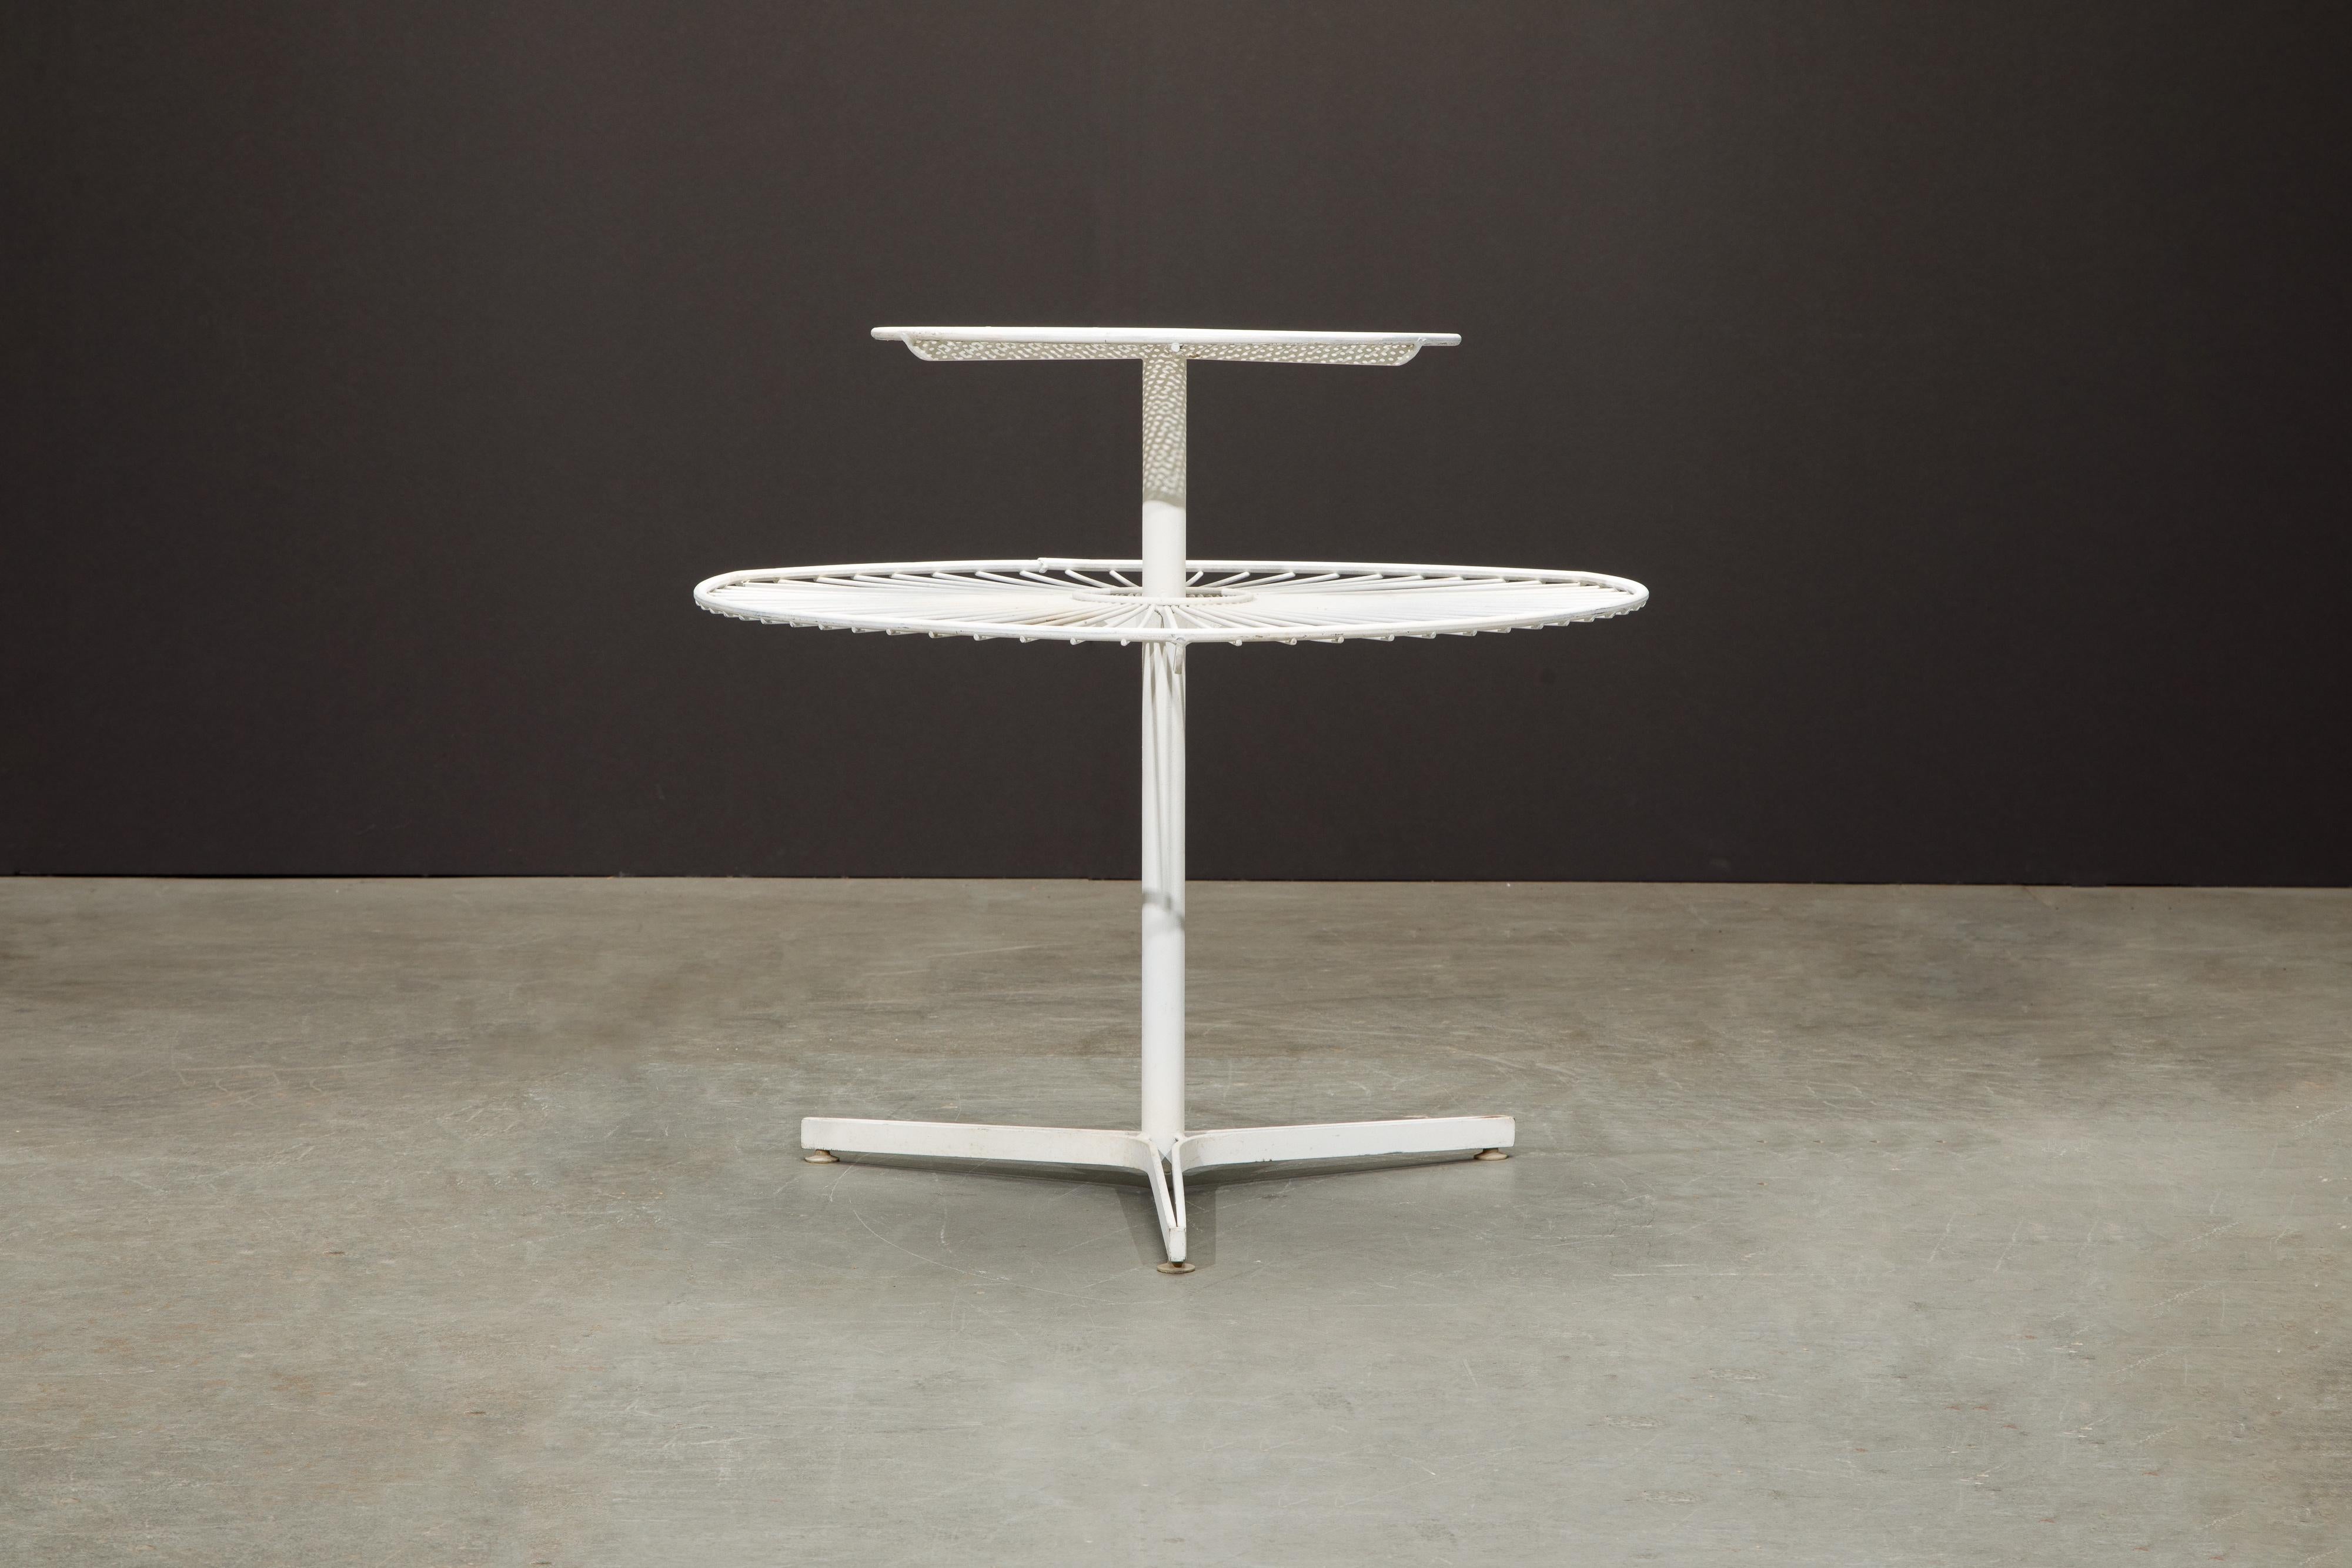 This rare collectors piece is an early Vladimir Kagan for Kagan-Dreyfuss 'Capricorn' tiered side table featuring a pierced enameled steel top which is reminiscent of designs by Mathieu Matégot and then the lower tier is in Kagan's signature spaced